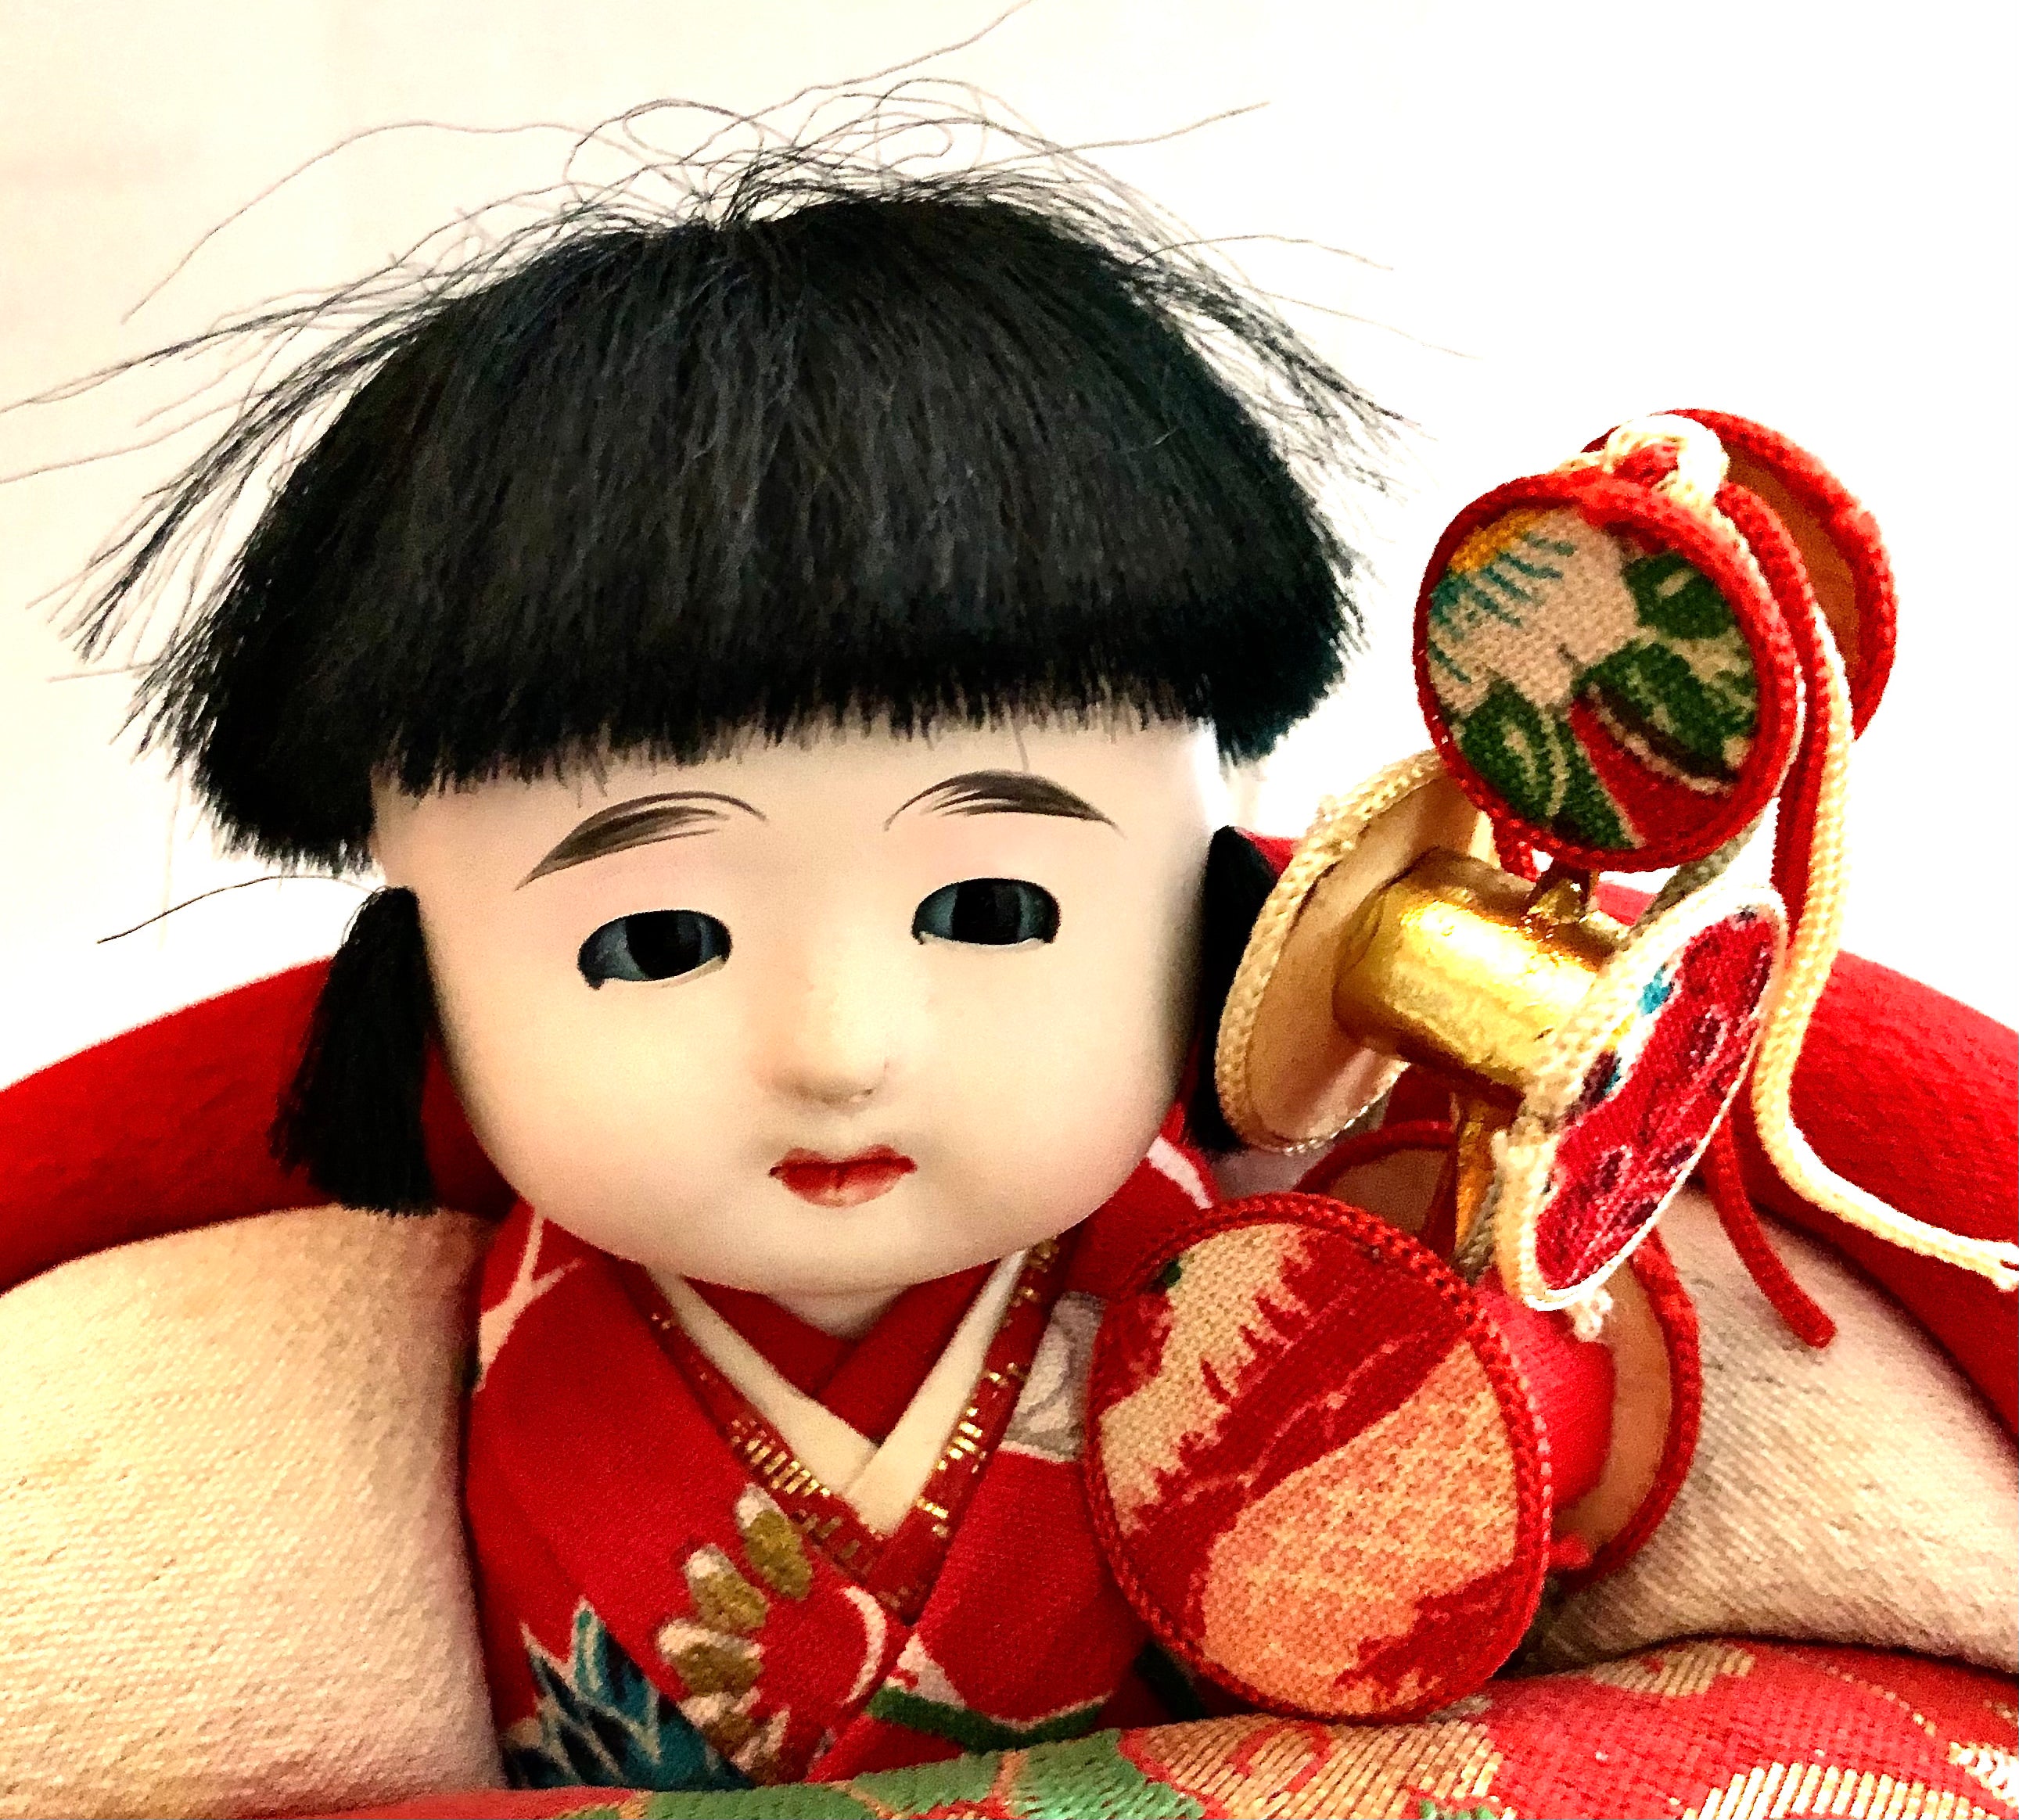 Get to know traditional Japanese toys!